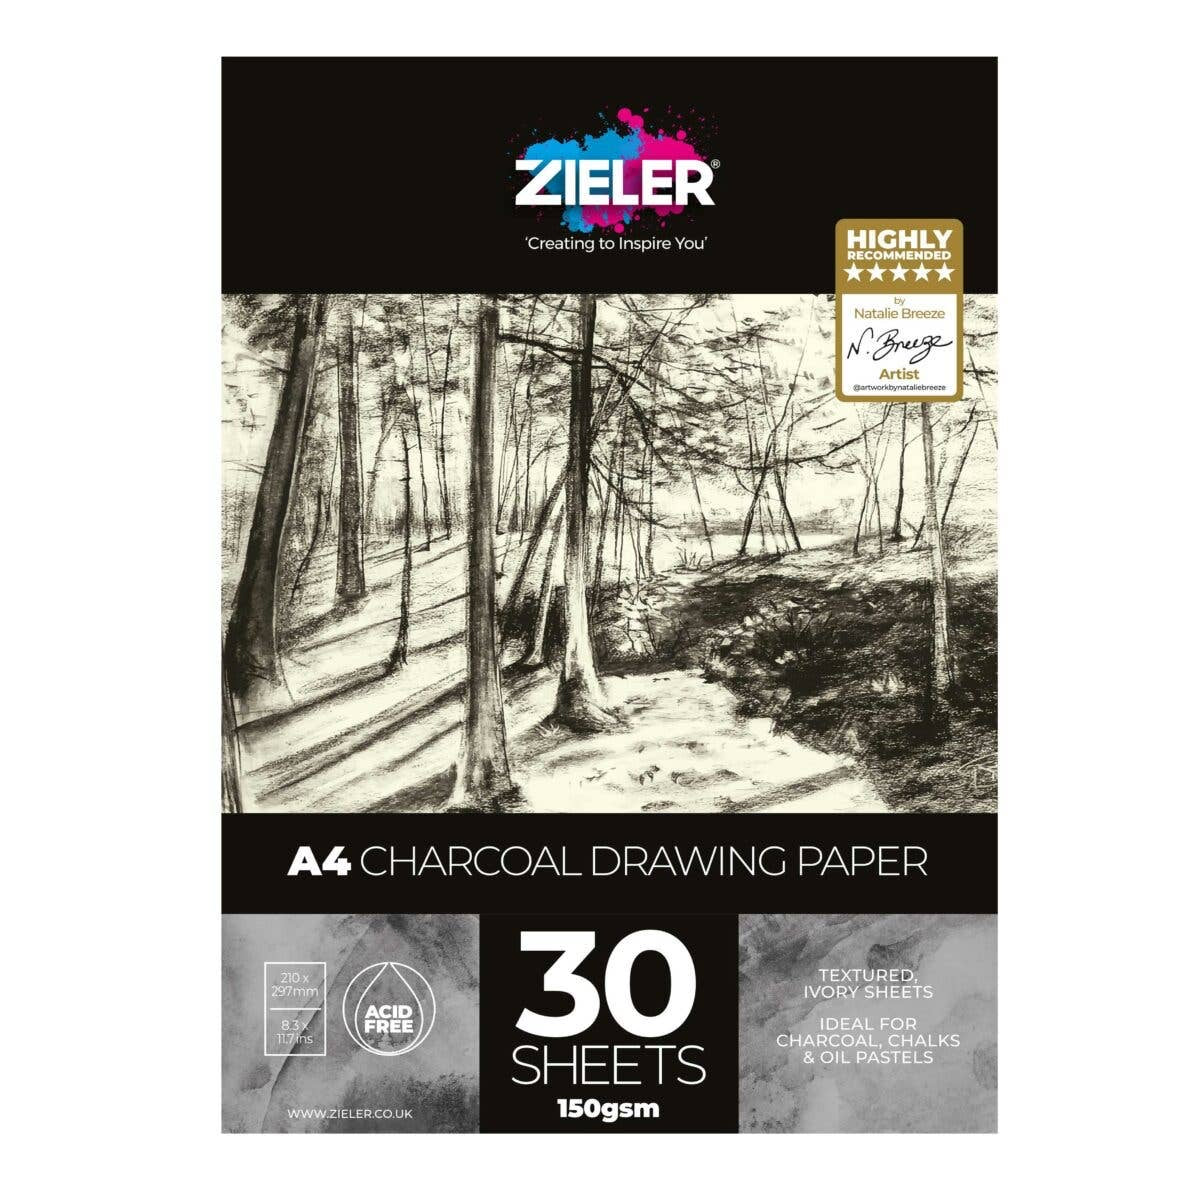 Zieler A4 Charcoal Drawing Paper Pad – 150gsm, 30 Sheets